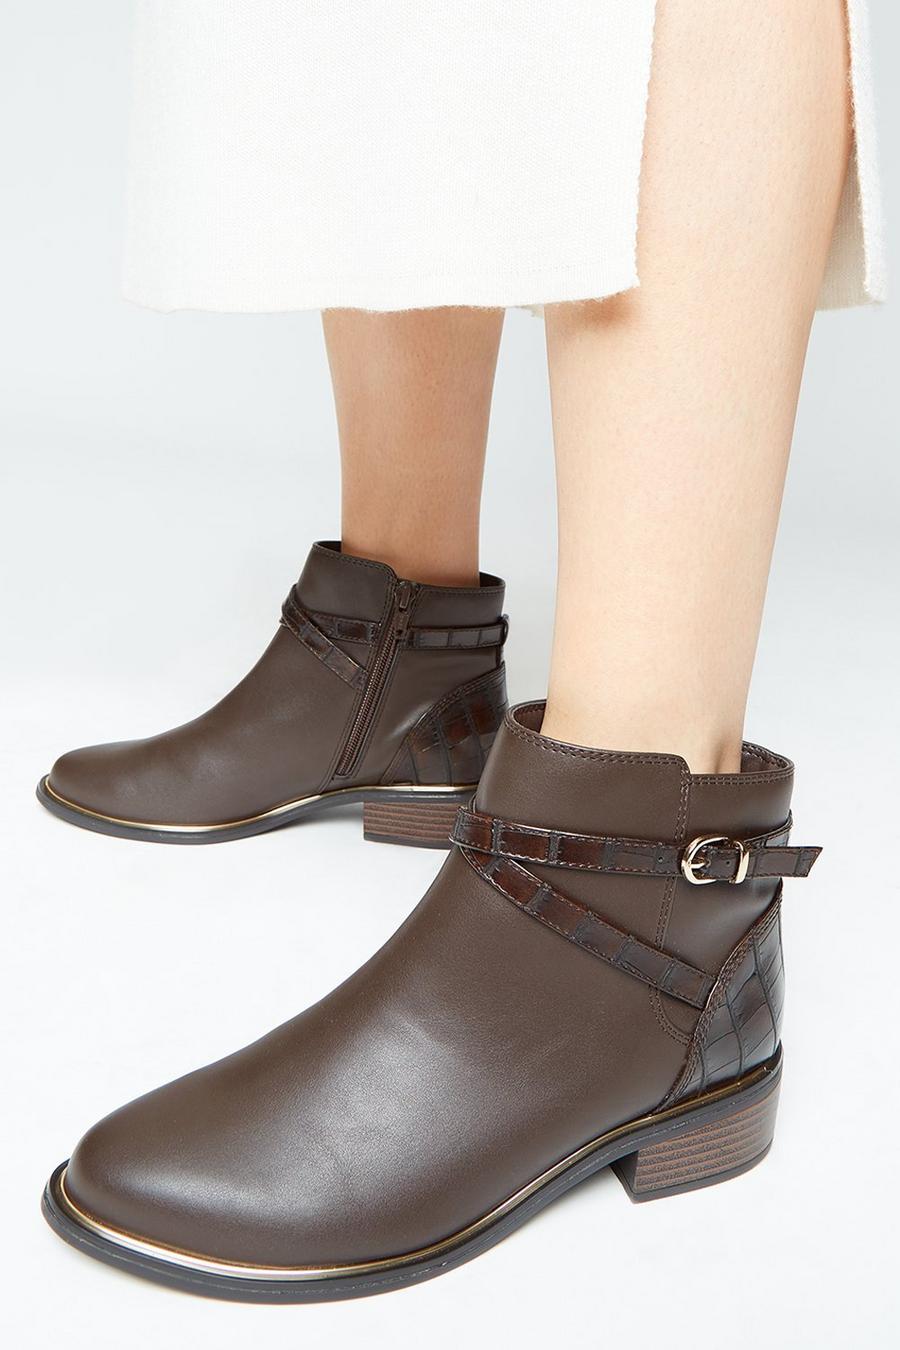 Avery Cross Strap Ankle Boot